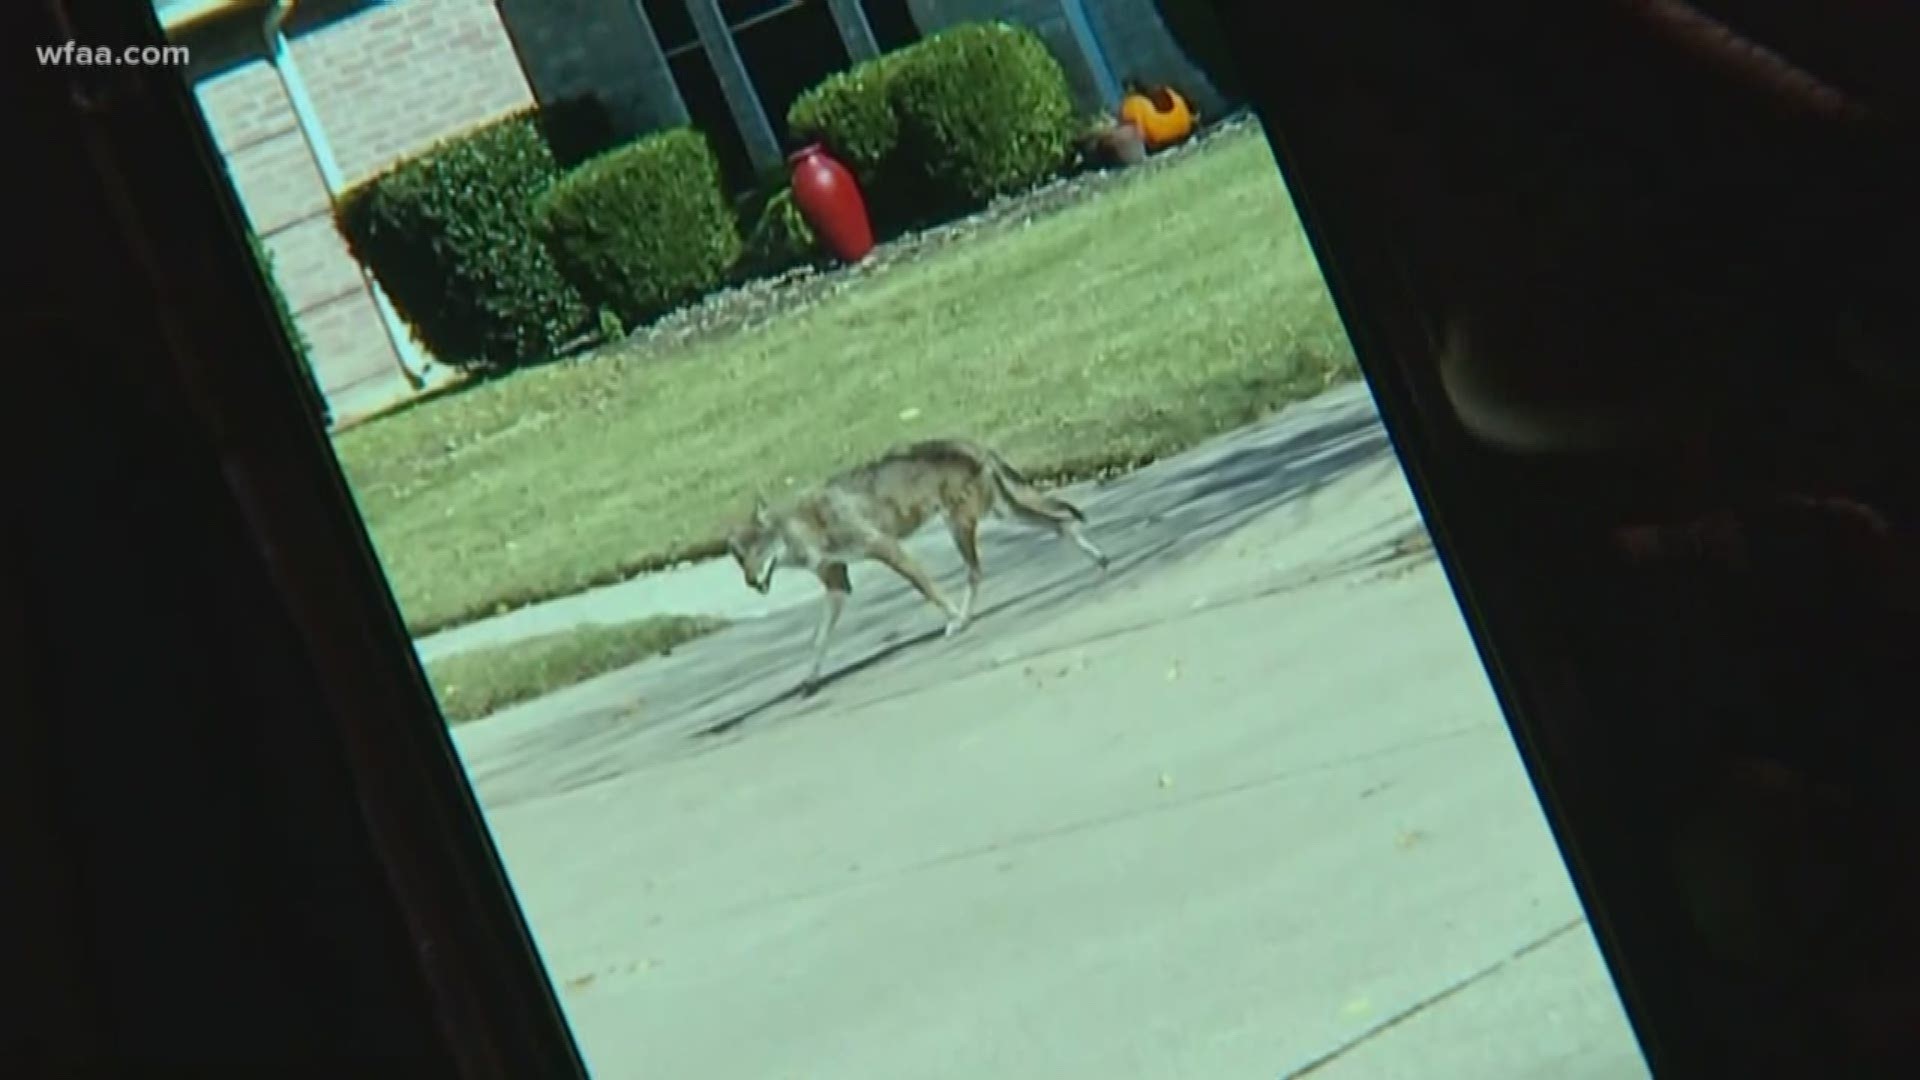 Coyotes attacking in Frisco neighborhood